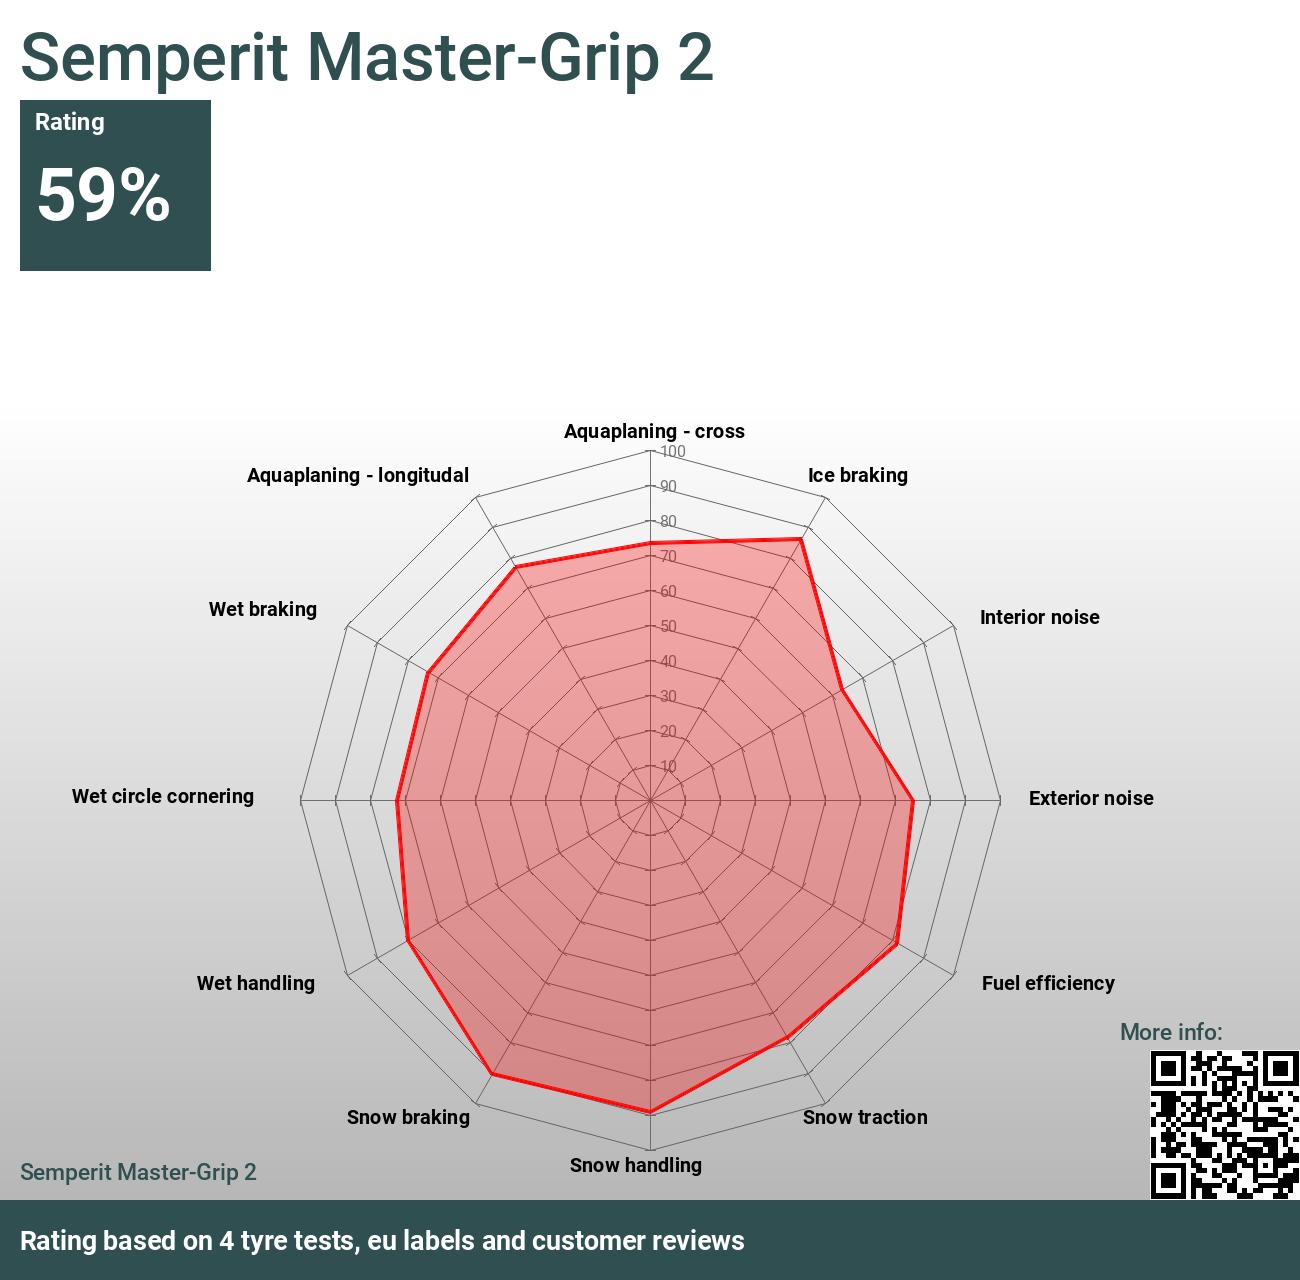 2 2024 Semperit - Master-Grip and Reviews tests